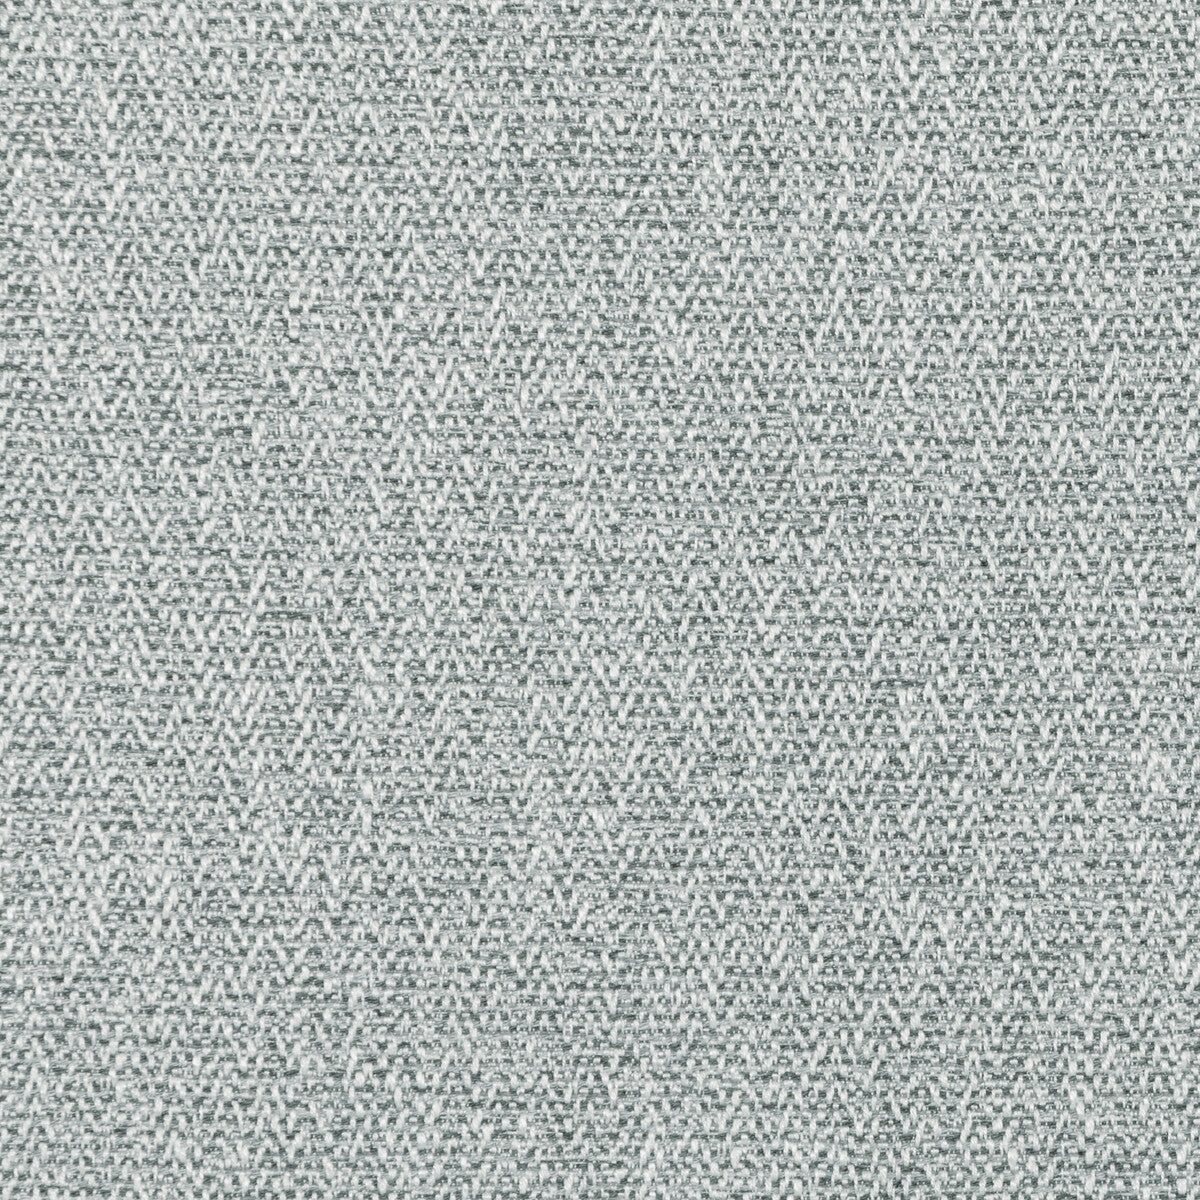 Saumur fabric in platinum color - pattern 36107.11.0 - by Kravet Couture in the Luxury Textures II collection